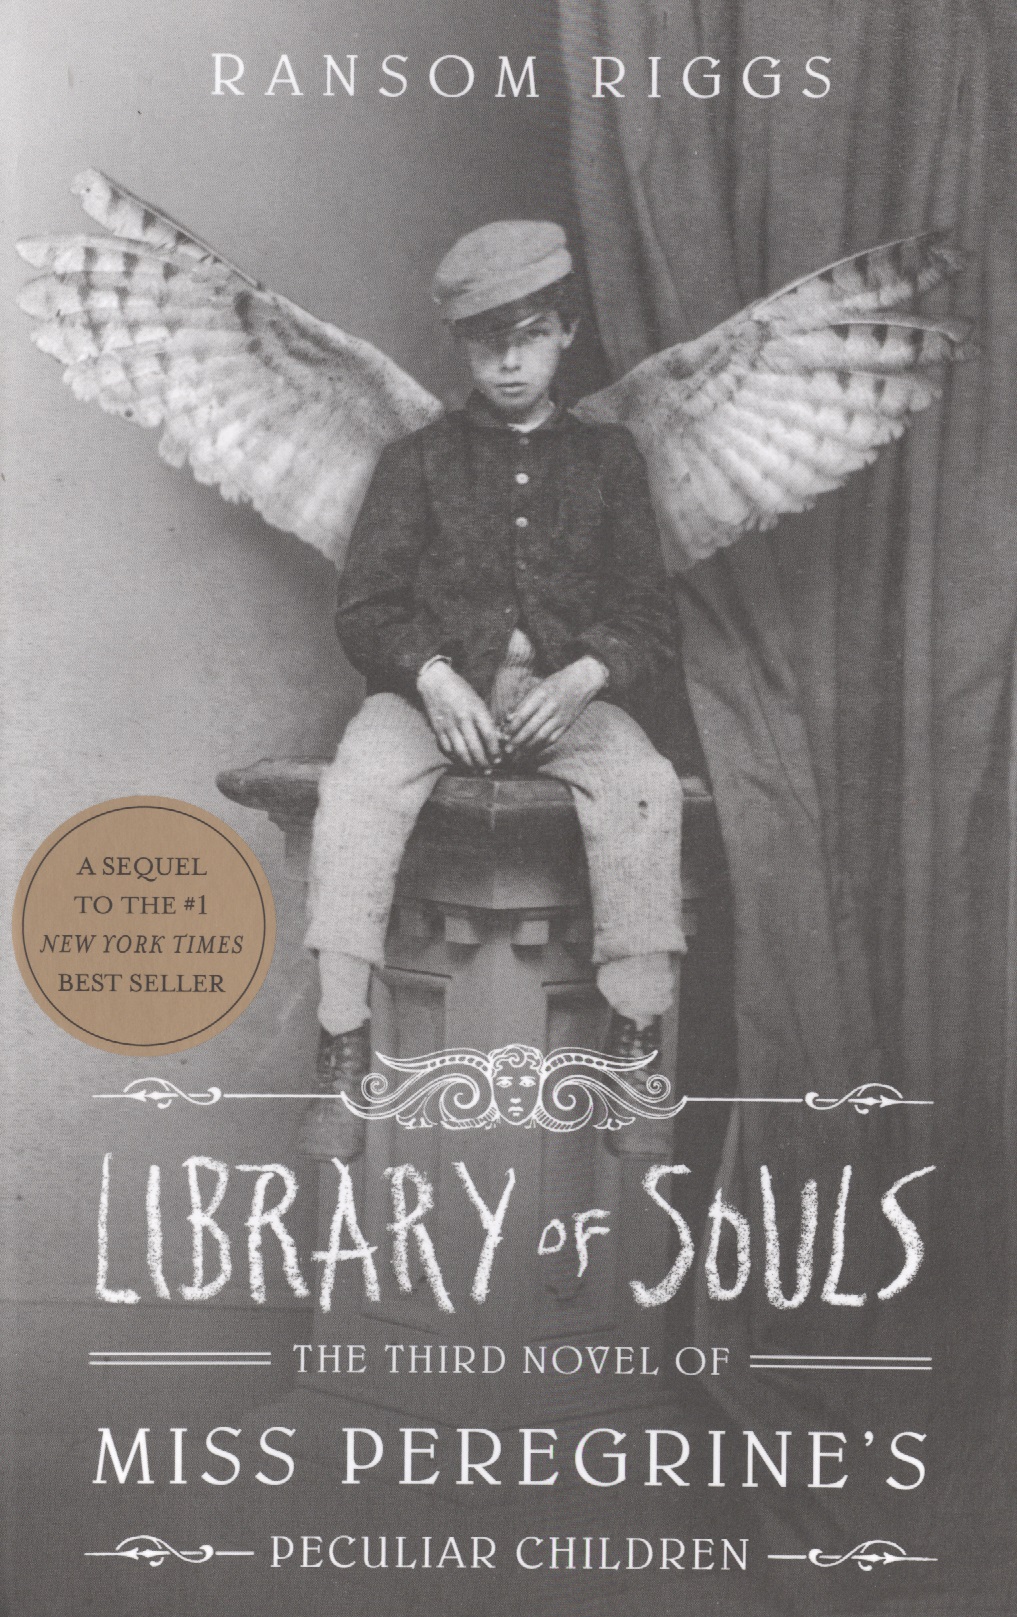 Riggs Ralph M. Library of Souls